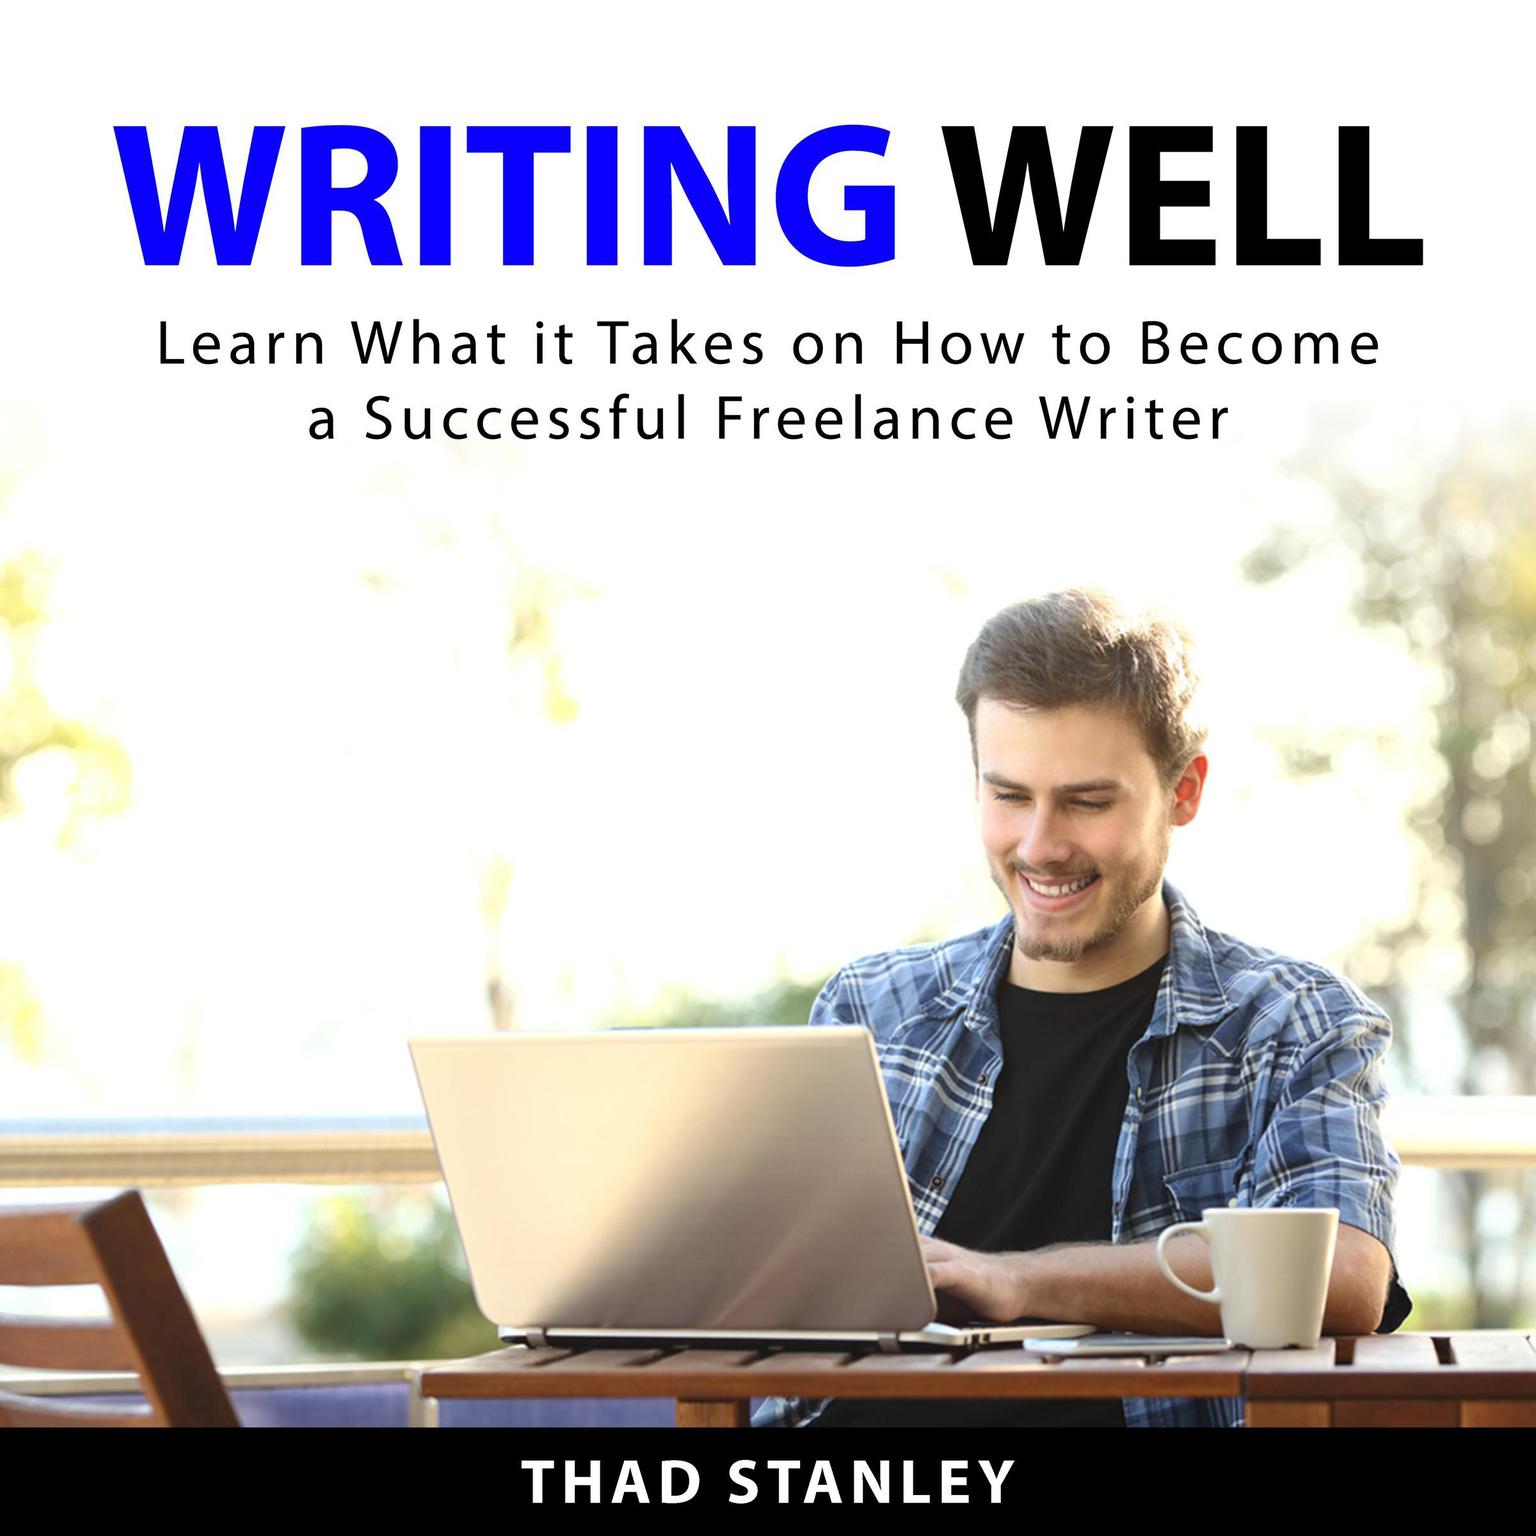 Writing Well: Learn What it Takes on How to Become a Successful Freelance Writer Audiobook, by Thad Stanley